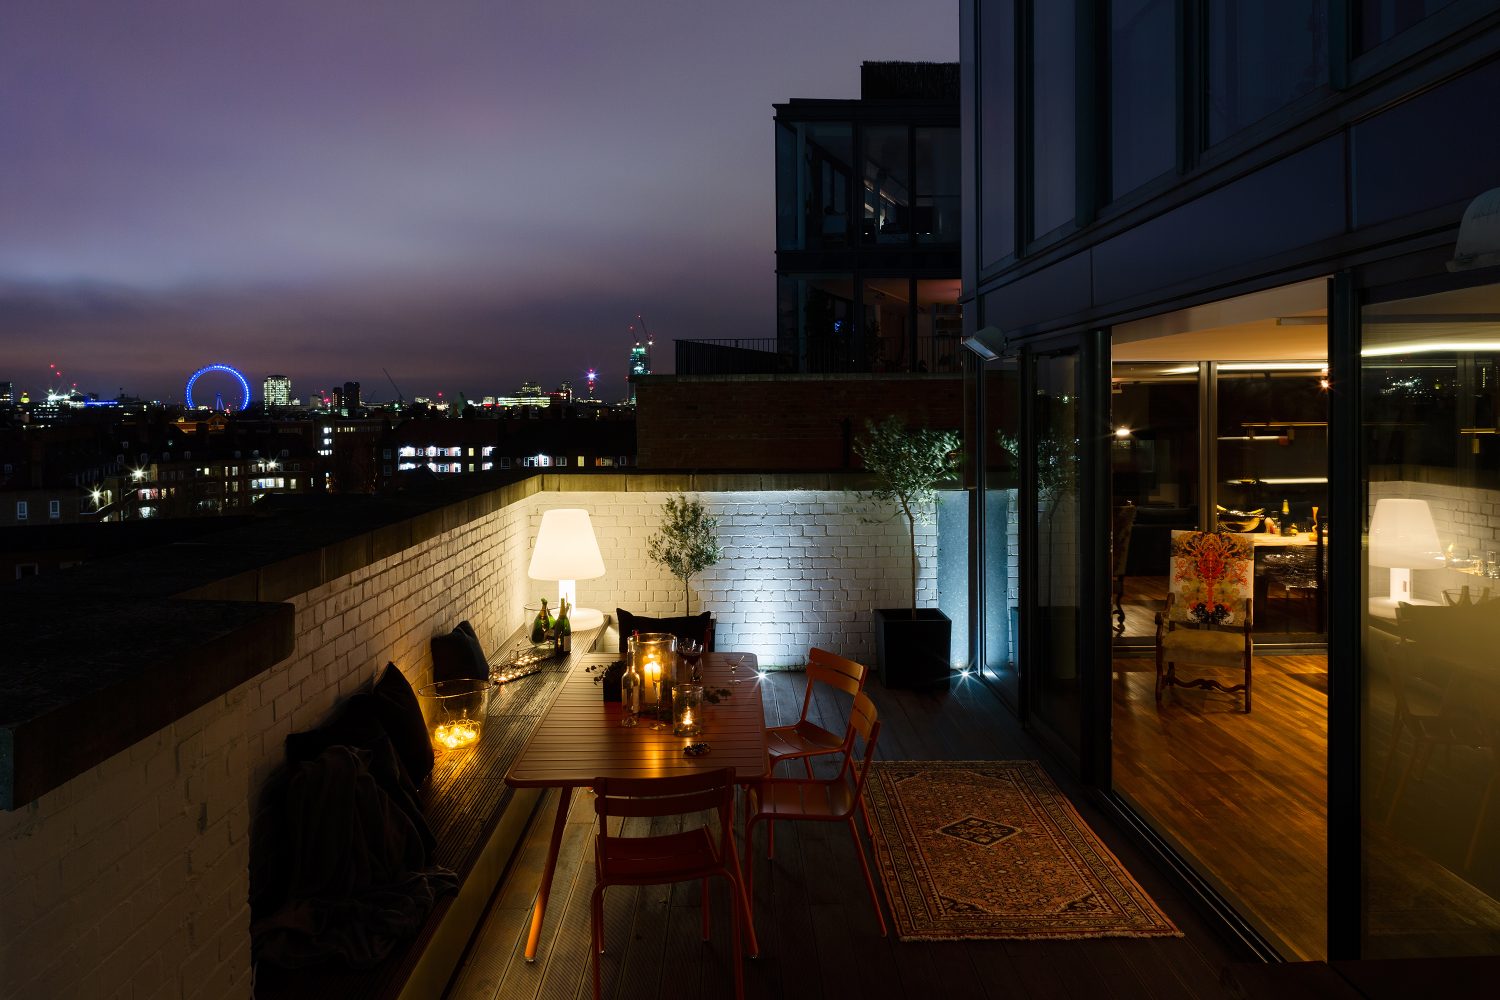 Night & Day by Daniel Hopwood – balcony with a London view. Penthouse interior design